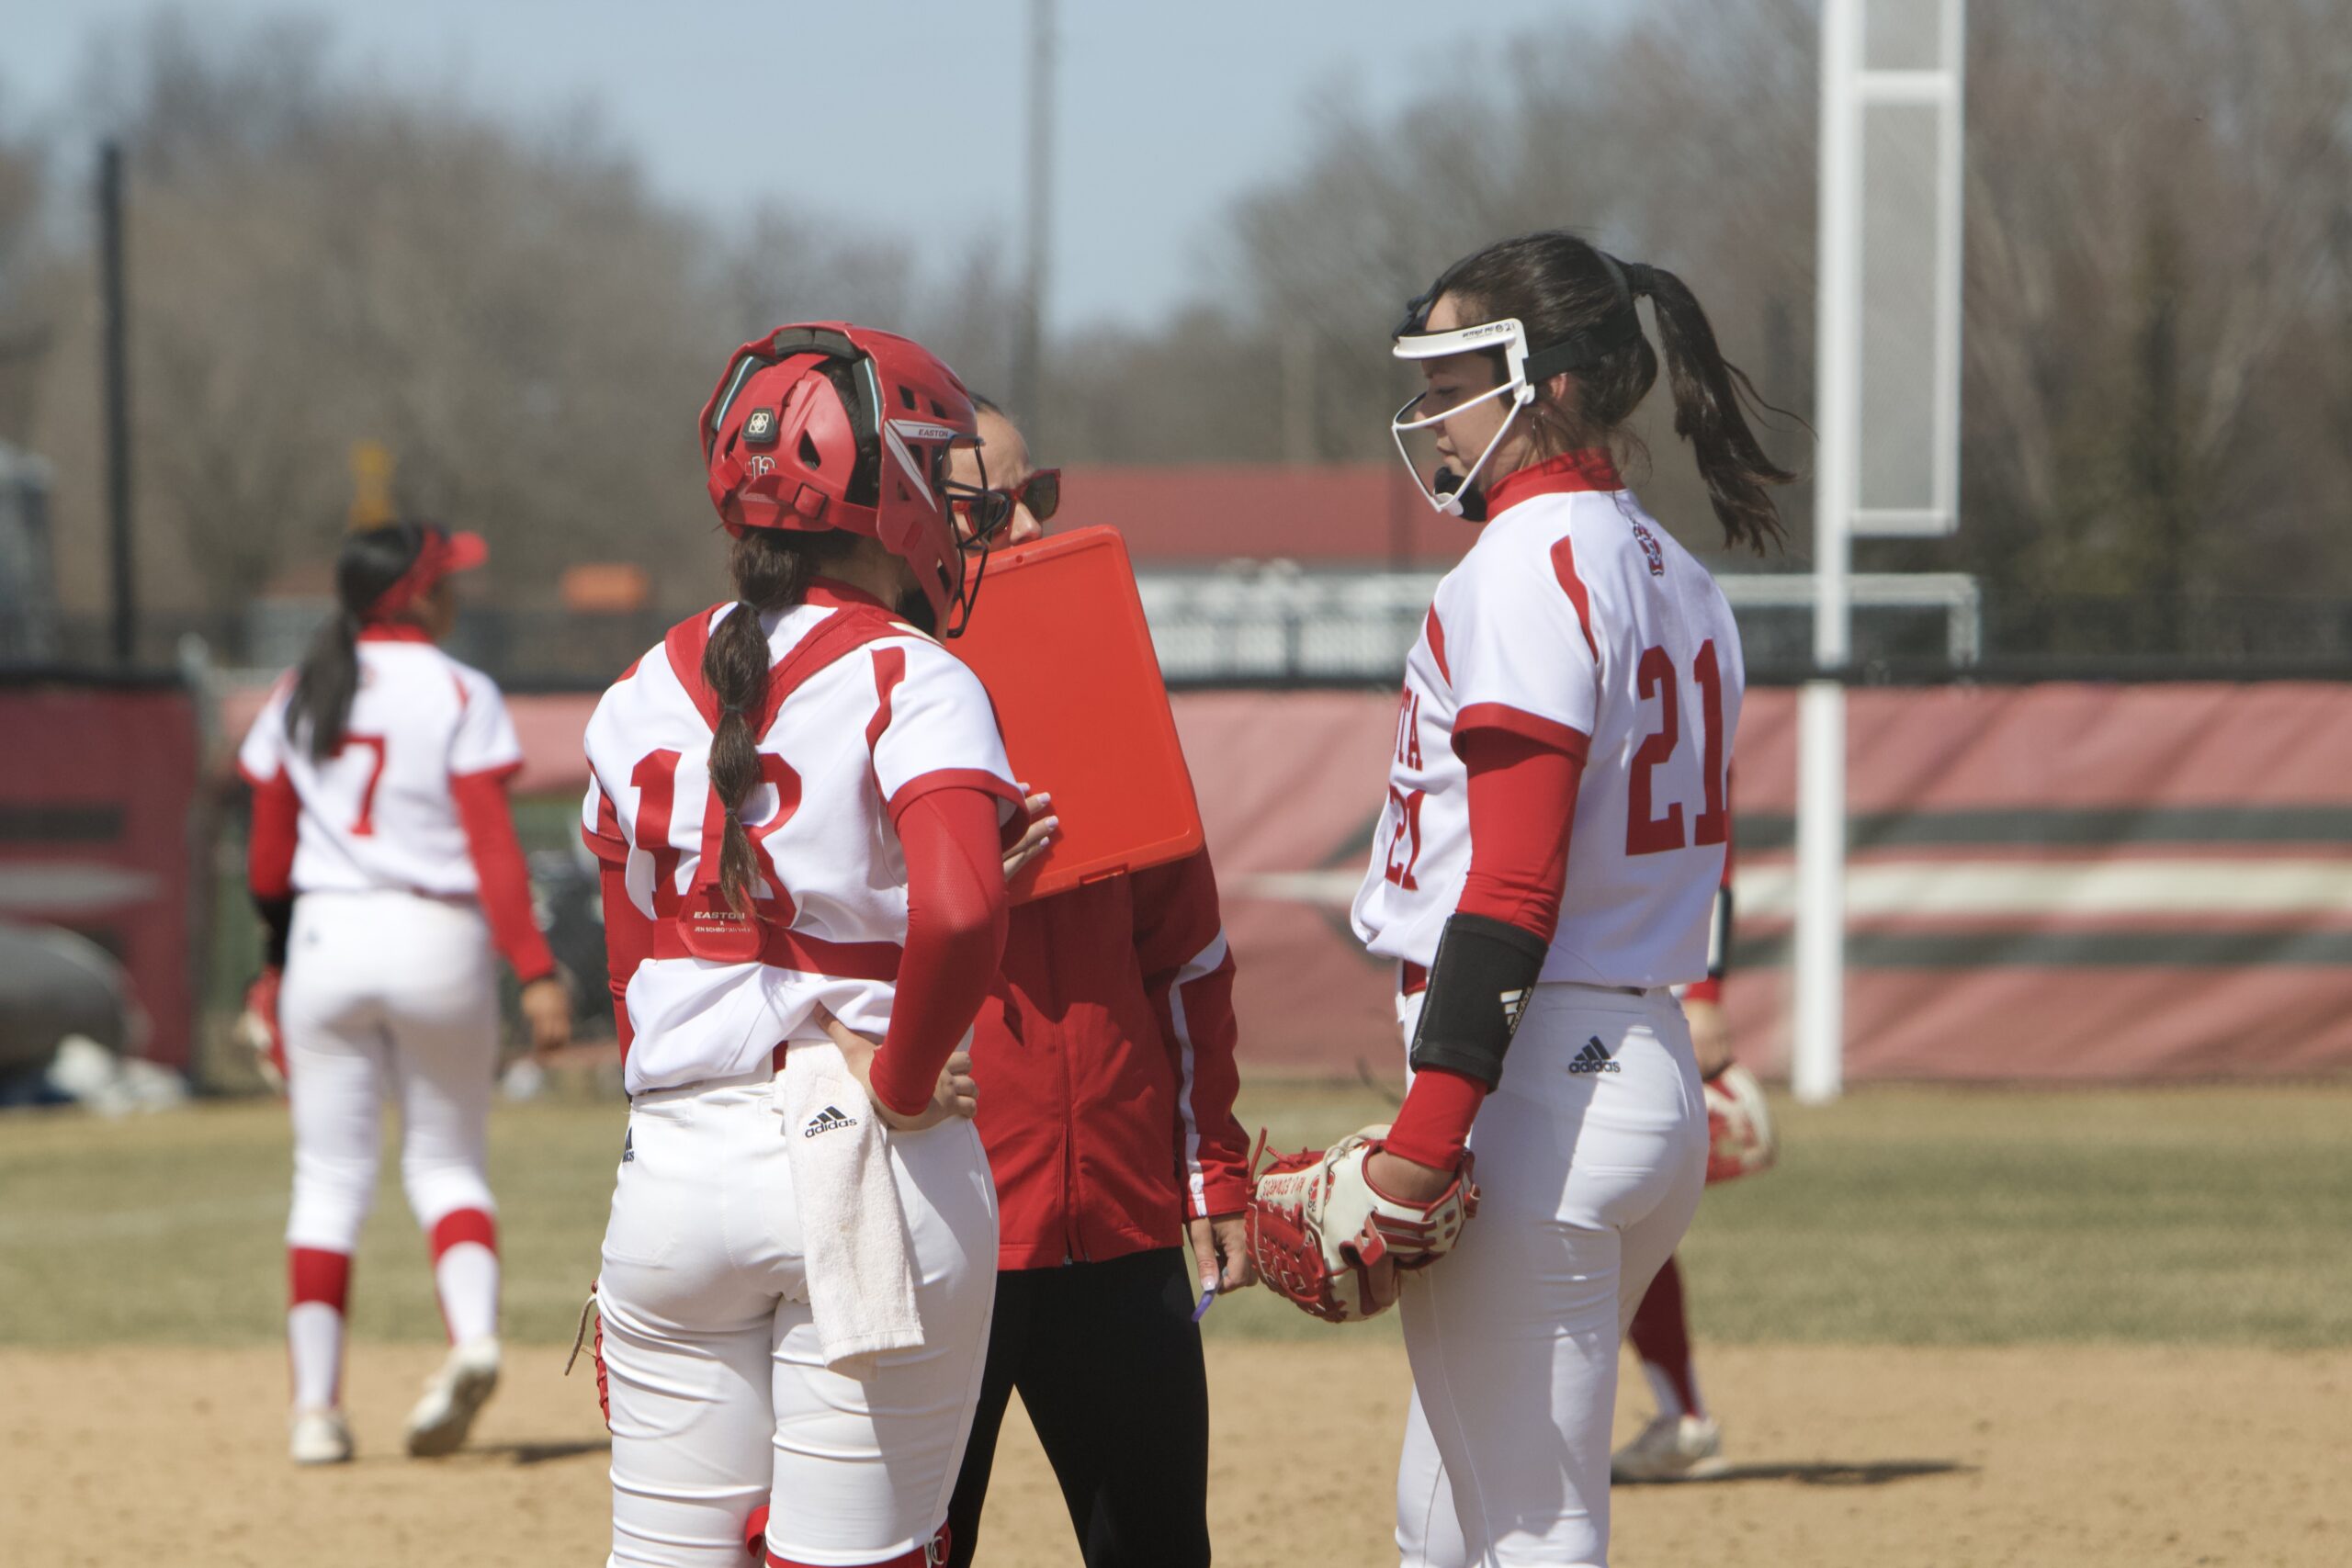 Edwards Throws a No-Hitter as Softball Defeats Western Illinois